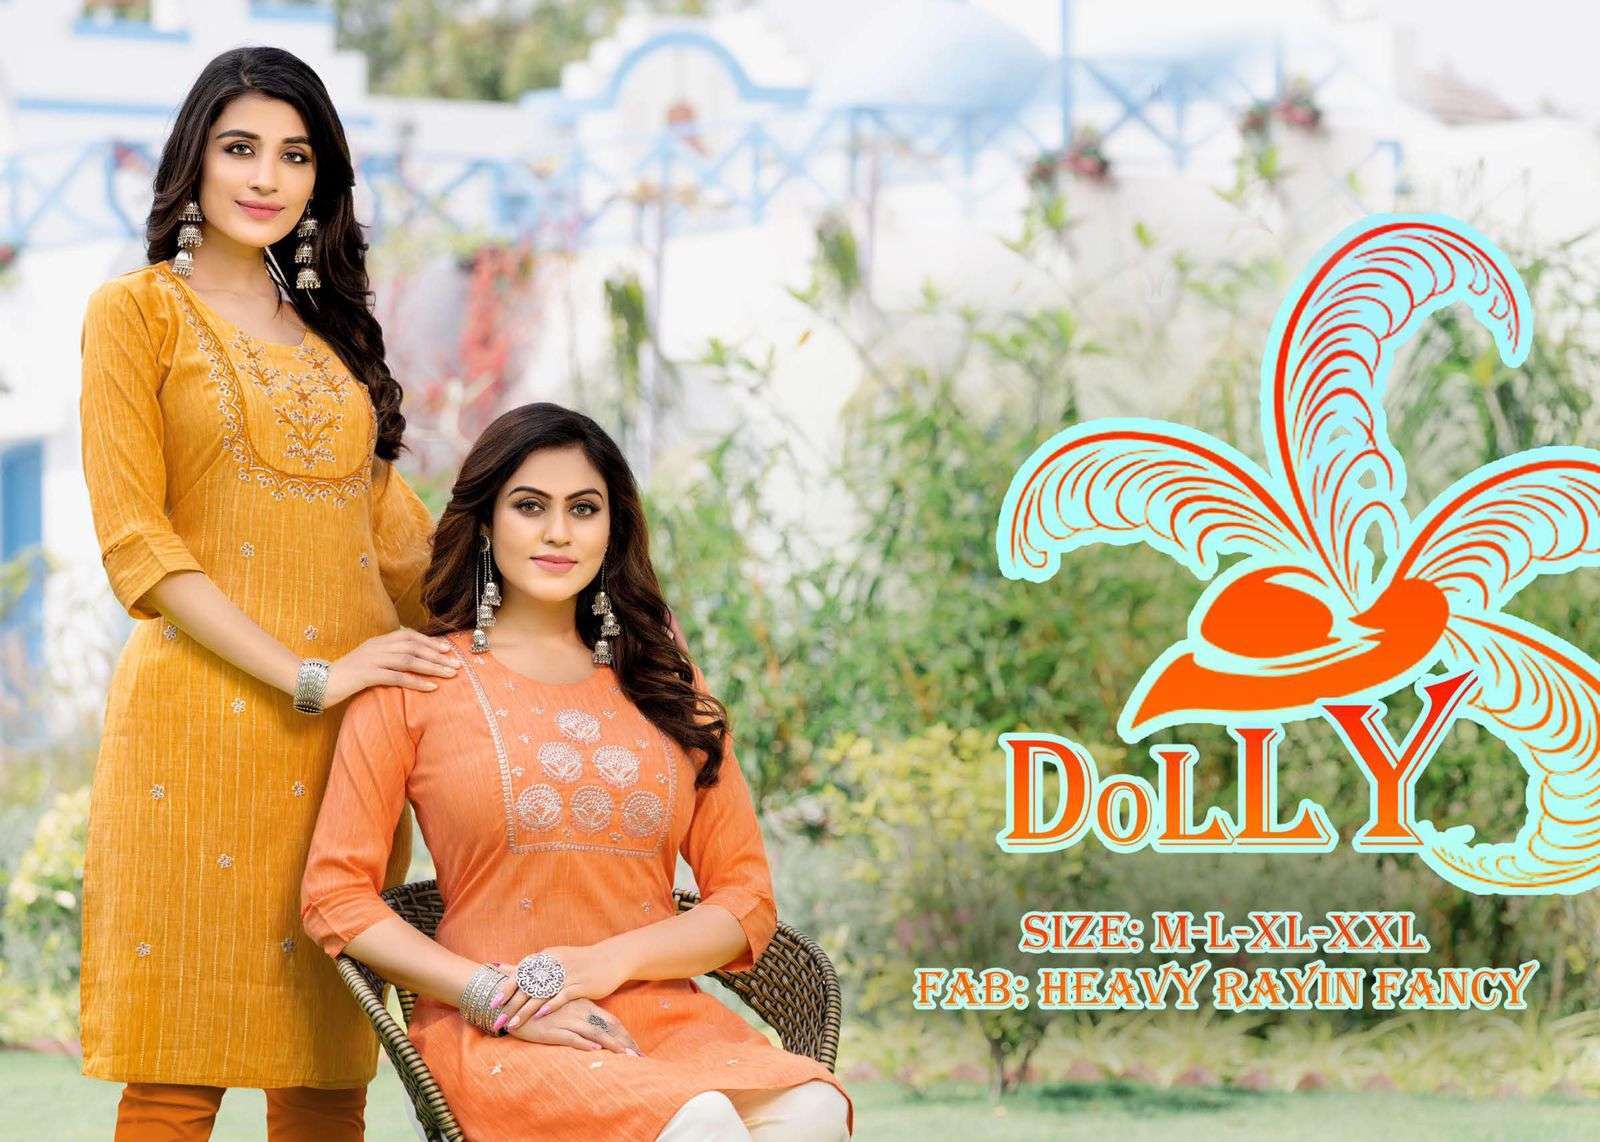 beauty queen dolly series 101-107 heavy rayon kurti 